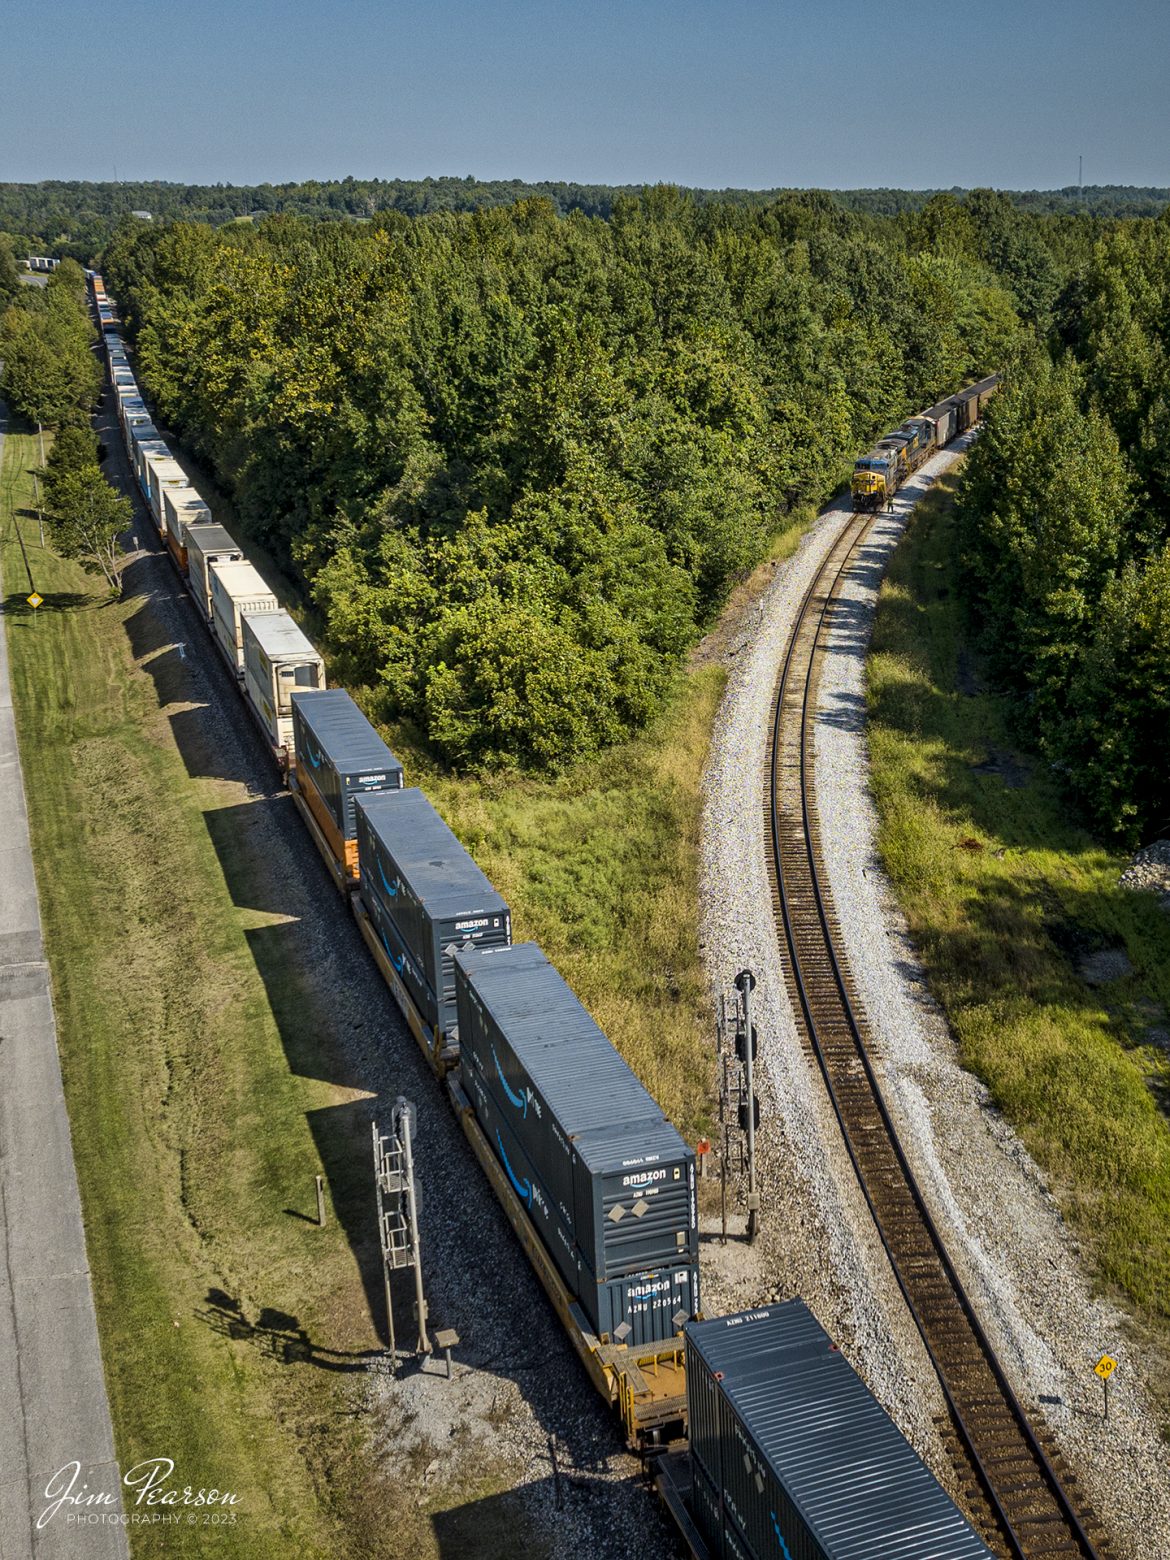 The conductor on loaded coal train C302 does a roll-by inspection of a northbound I028, as they wait on the on the cutoff at Mortons Junction on September 14th, 2023, for the hot intermodal to clear the main, so they can continue their run south on the CSX Henderson Subdivision.

Tech Info: DJI Mavic 3 Classic Drone, RAW, 22mm, f/8, 1/2000, ISO 130.

#trainphotography #railroadphotography #trains #railways #jimpearsonphotography #trainphotographer #railroadphotographer #dronephoto #trainsfromadrone #Kentuckytrains #csxhendersonsubdivision